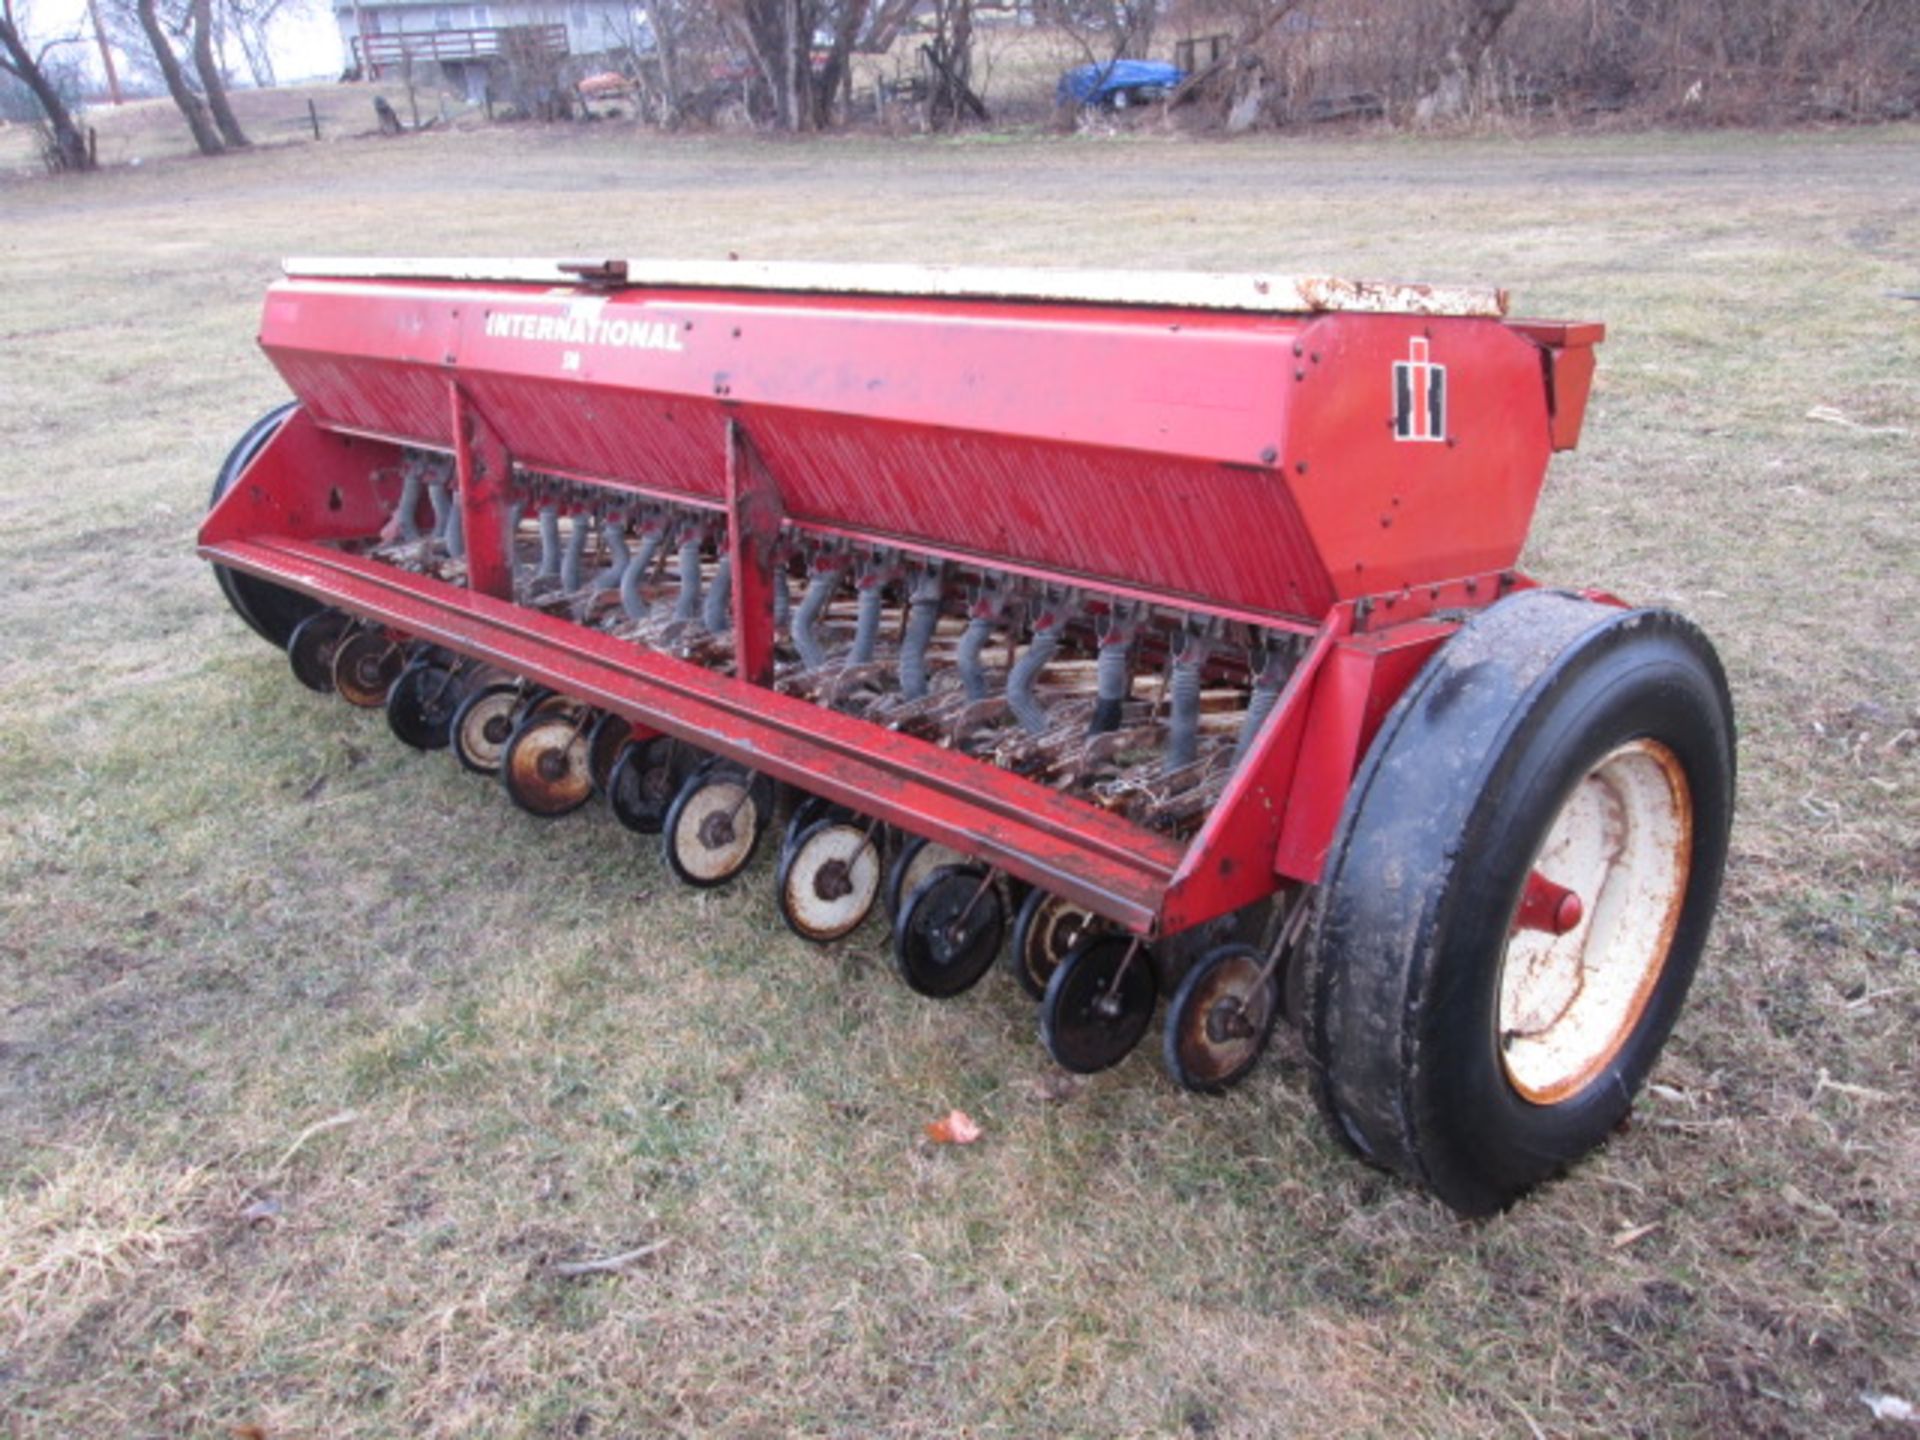 IH GRAIN DRILL 510, GRASS SEED, 13', 7.5" Spacing - Image 4 of 11